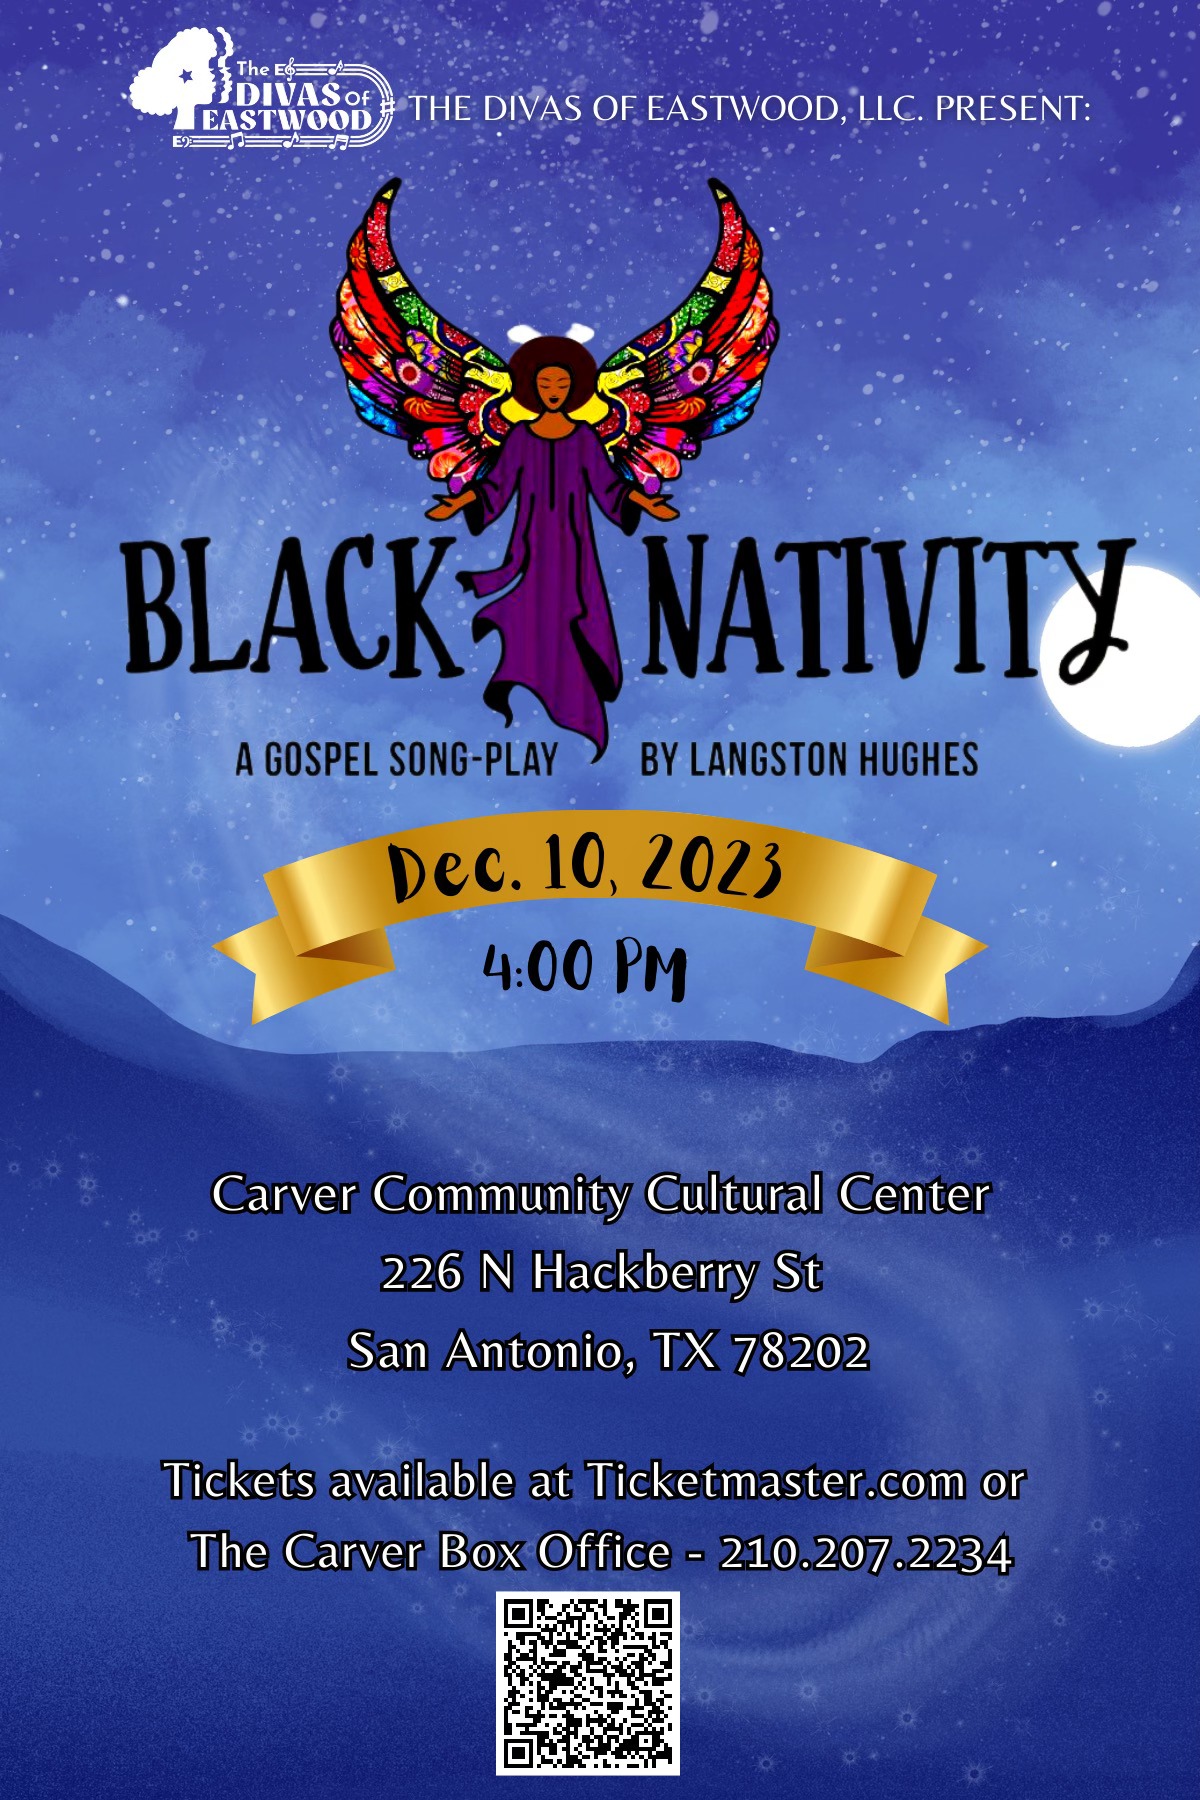 Black Nativity by The Divas of Eastwood